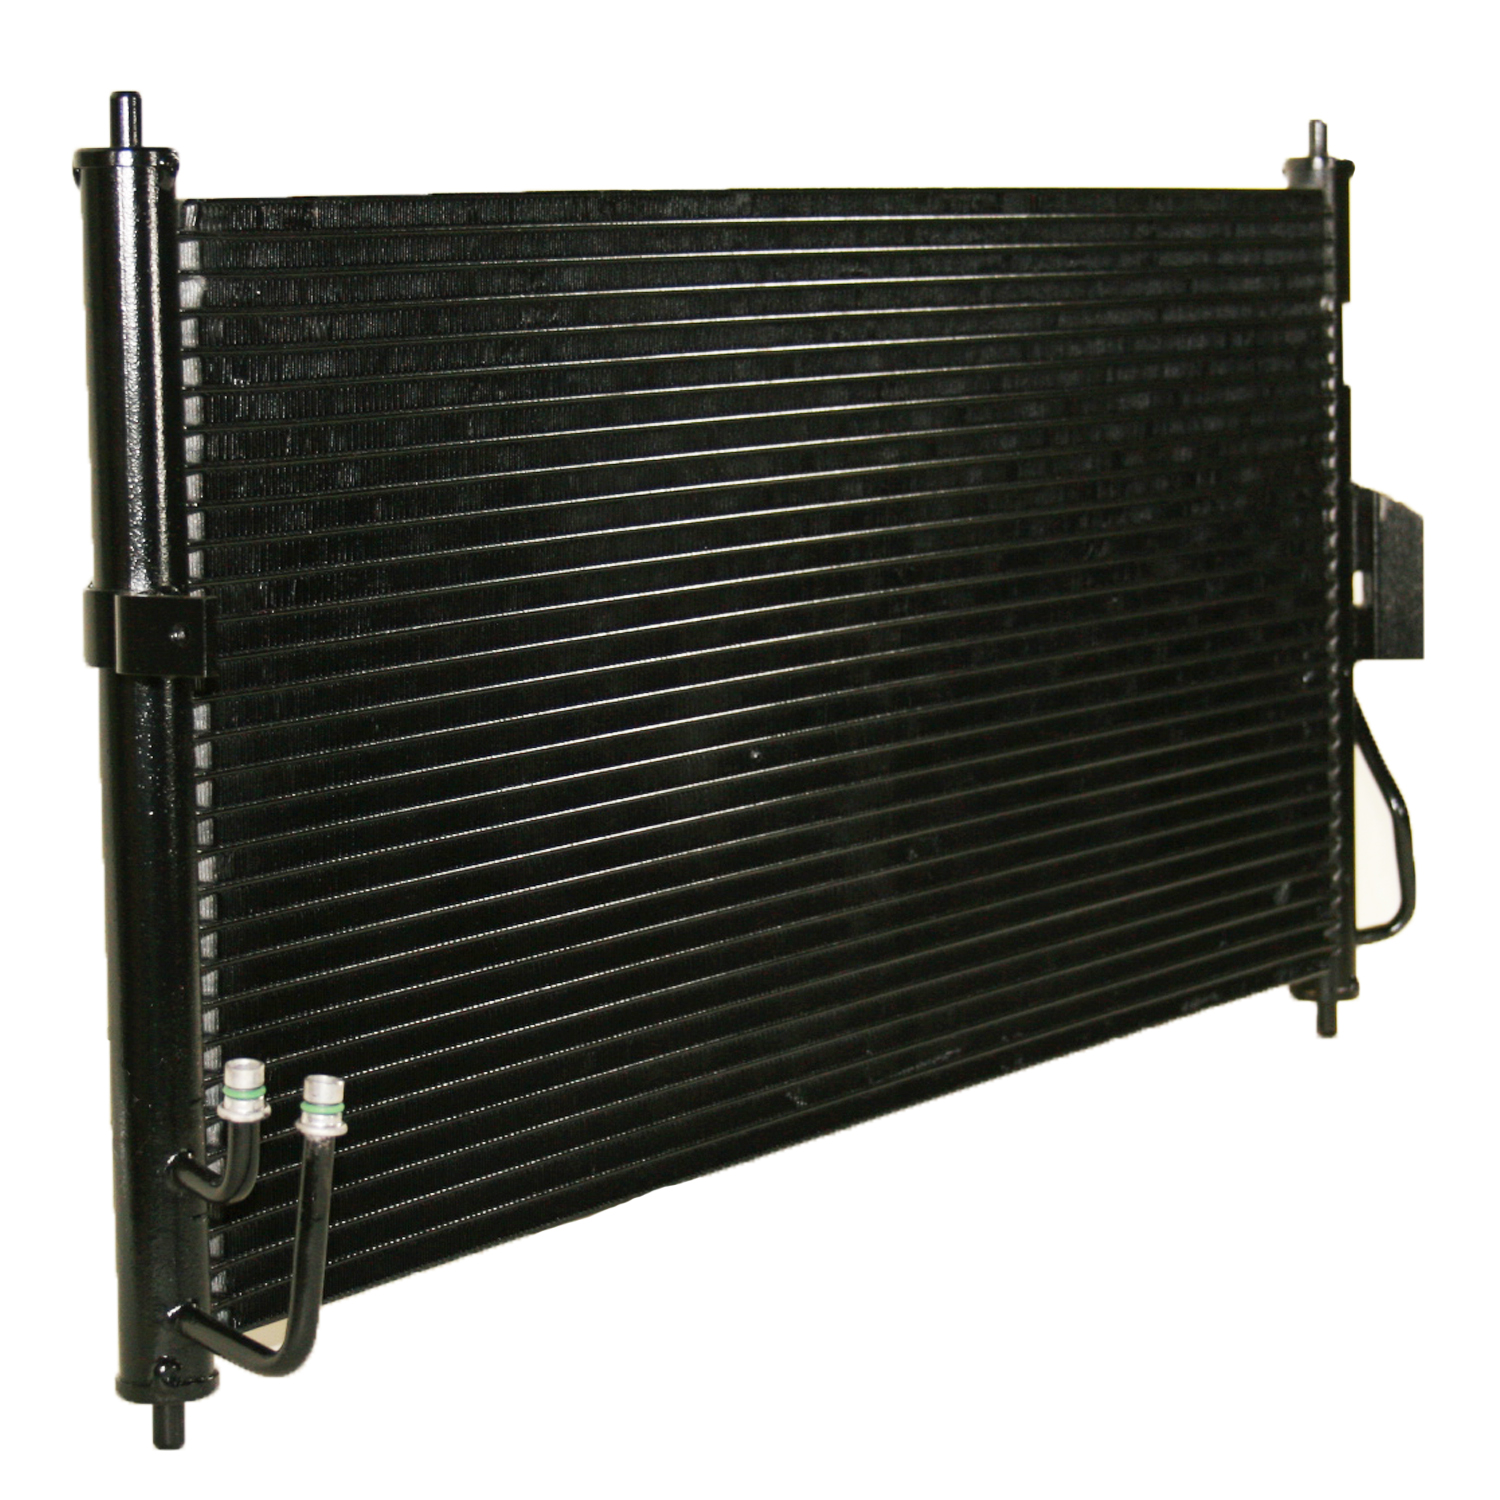 TCW Condenser 44-3099 New Product Image field_60b6a13a6e67c